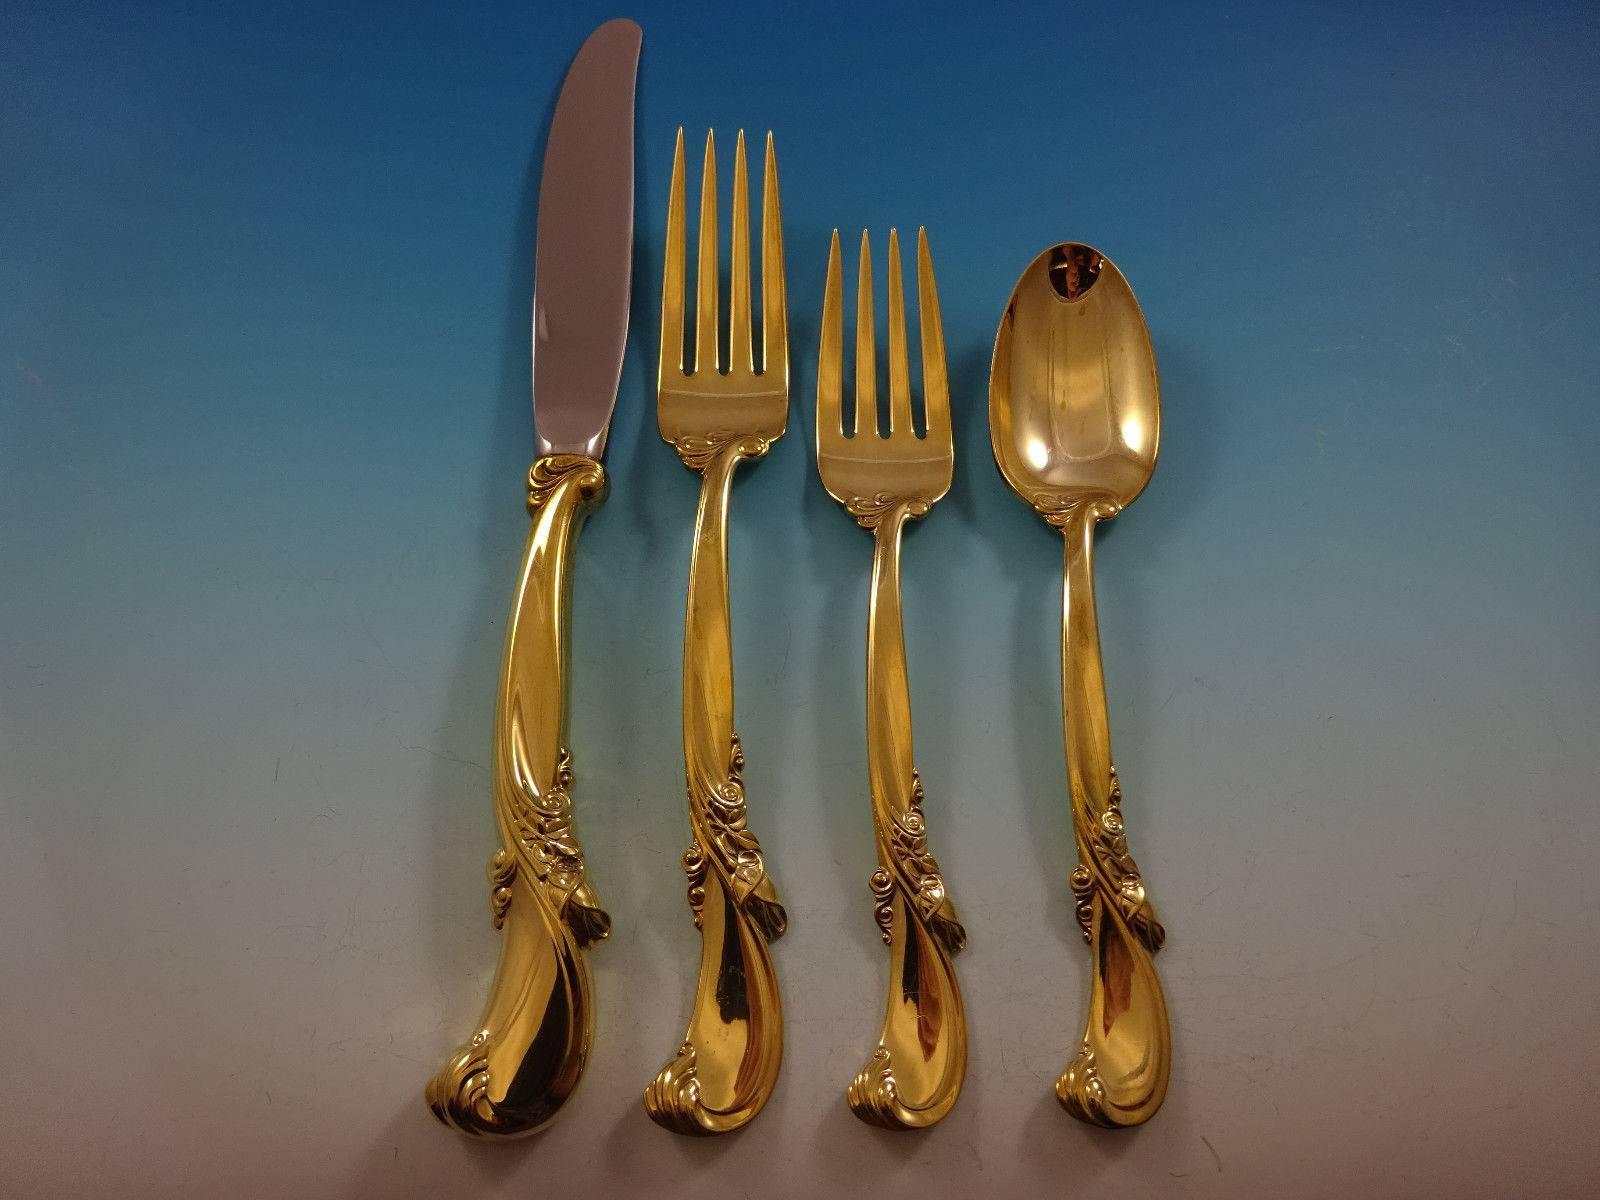 Gorgeous Waltz of spring gold by Wallace Sterling Silver flatware set, 48 pieces. Gold flatware is on trend and makes a bold statement on your table. 

This set is vermeil (completely gold-washed) and includes:

12 knives, 8 7/8